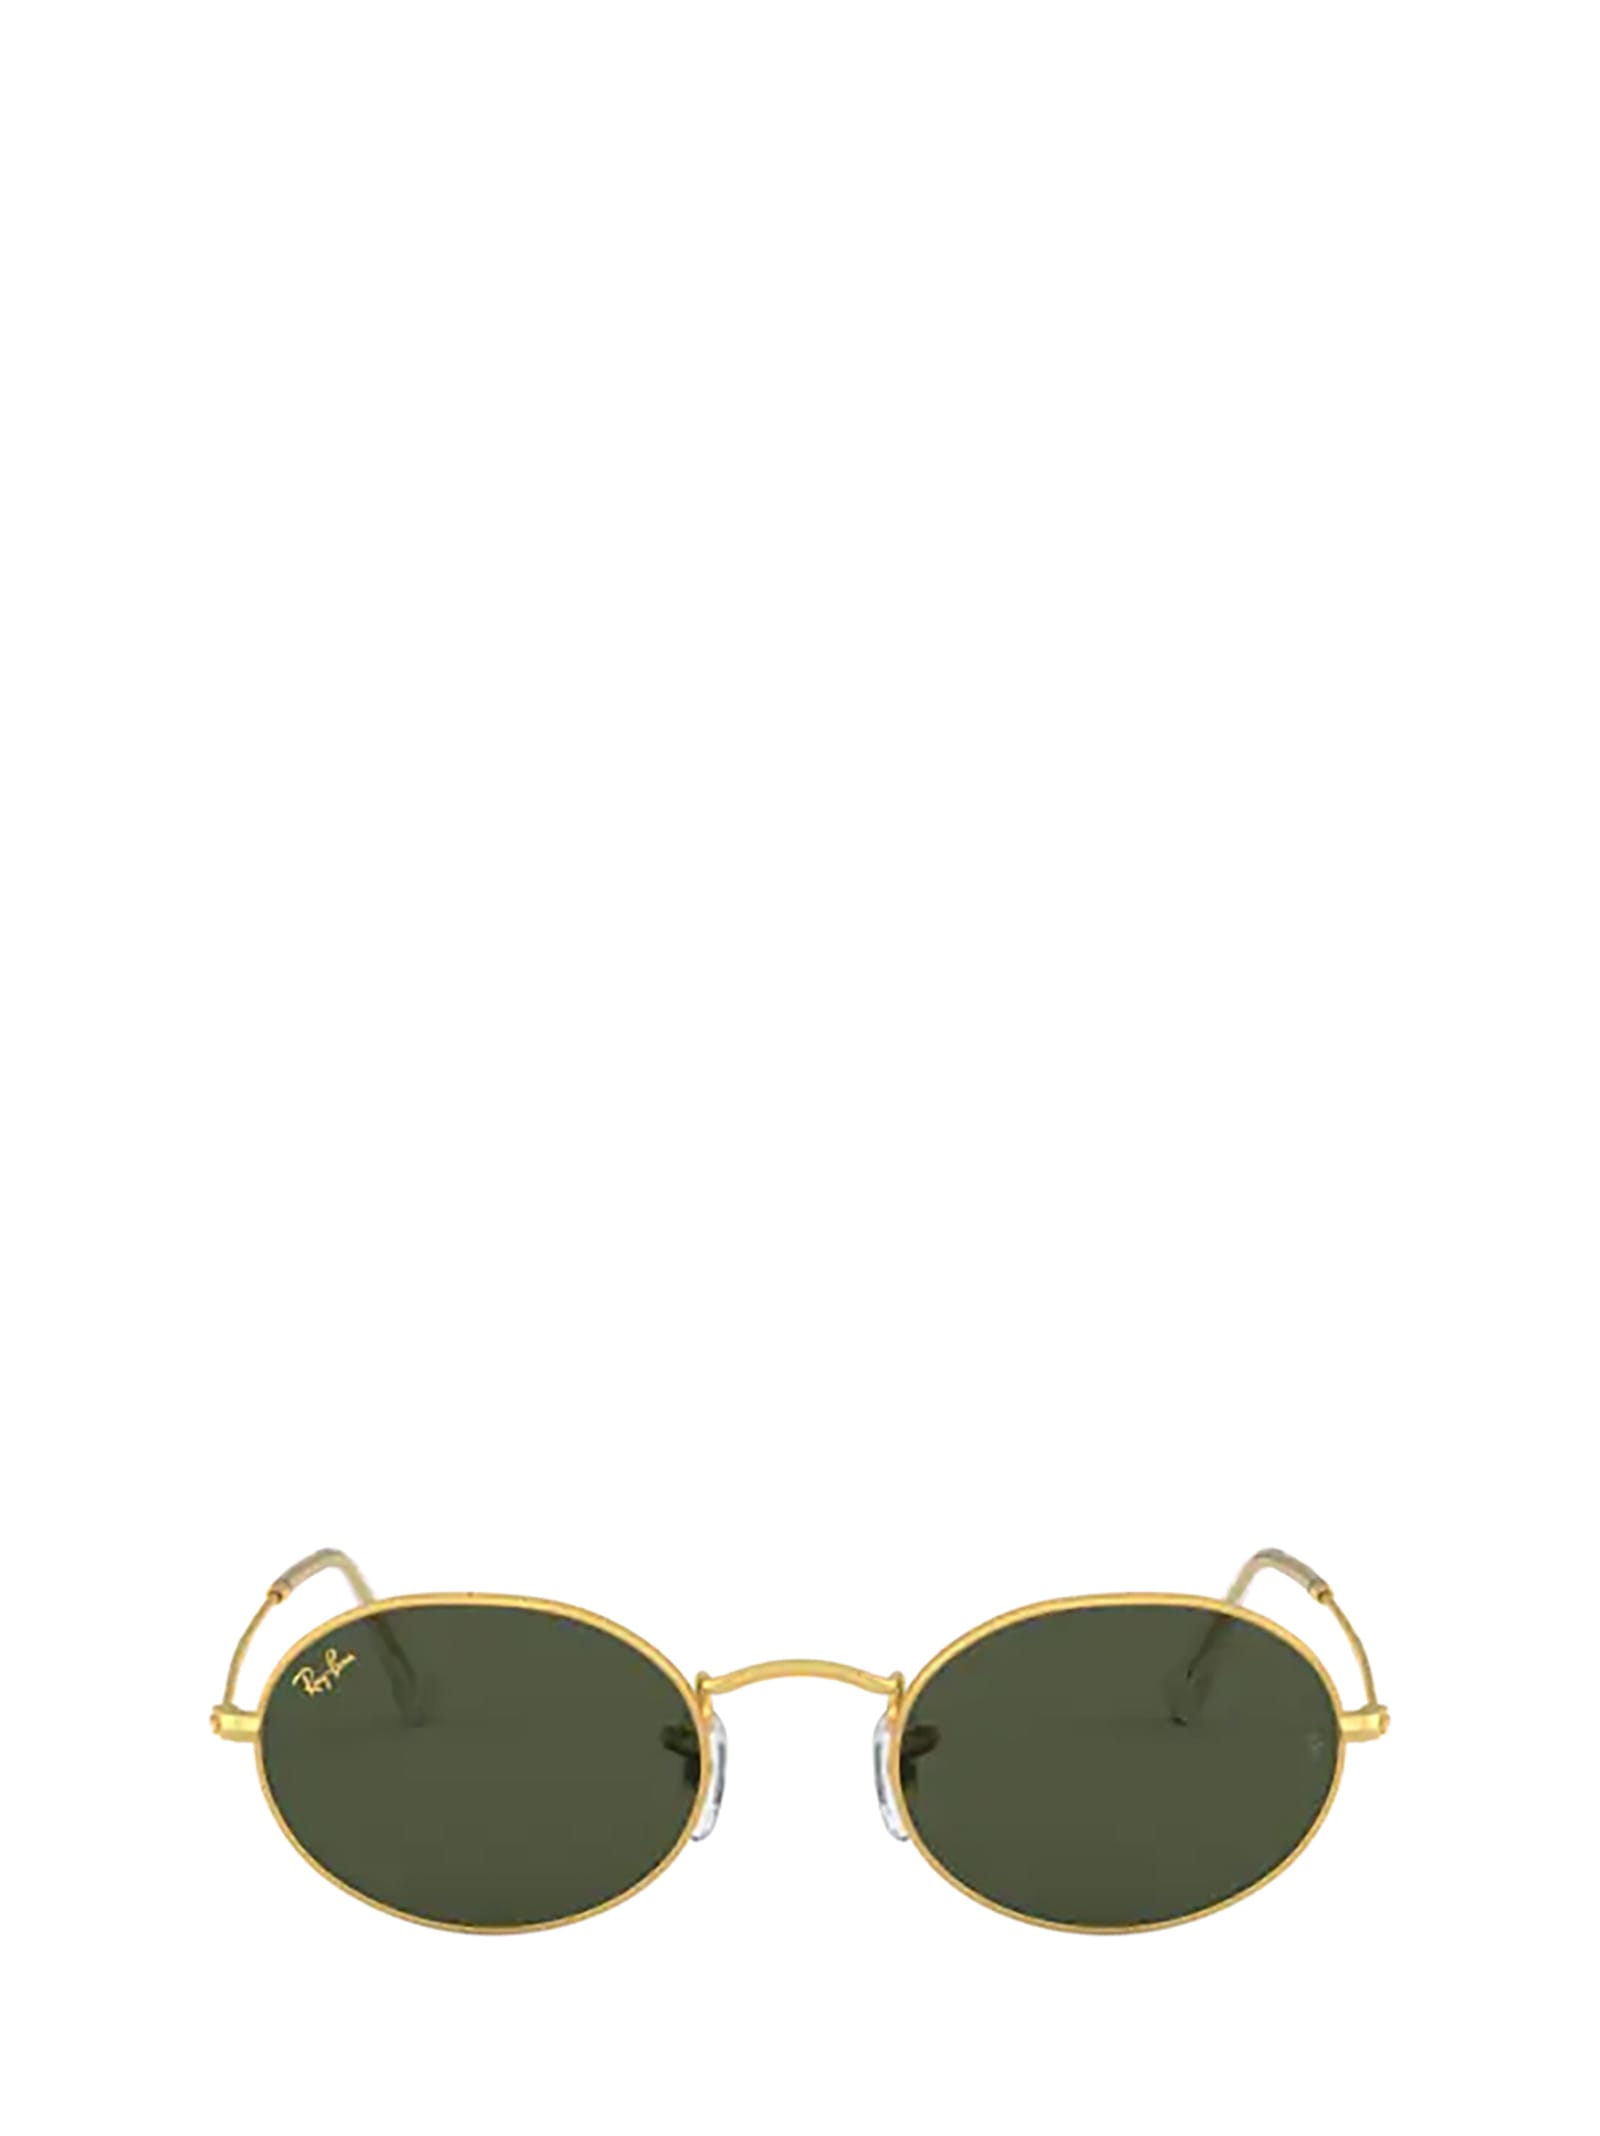 Ray-Ban Ray-ban Rb3547 Legend Gold Sunglasses